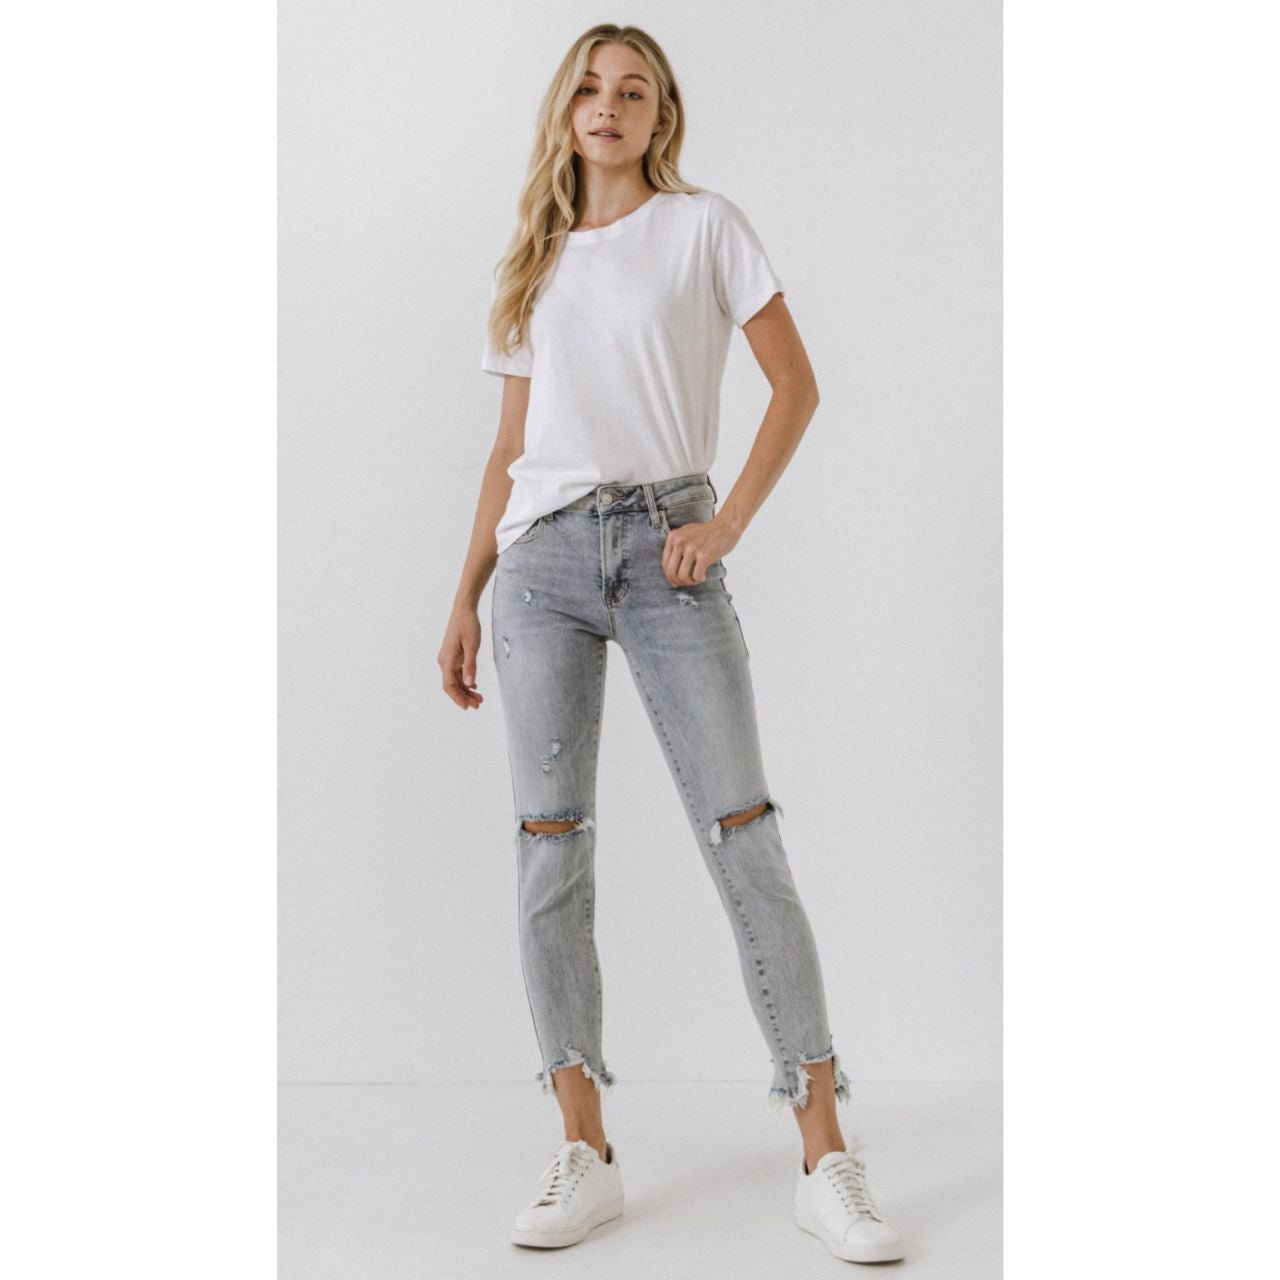 Grey Lab Mid Rise Distressed Ankle Skinny Jeans - The Graphic Tee